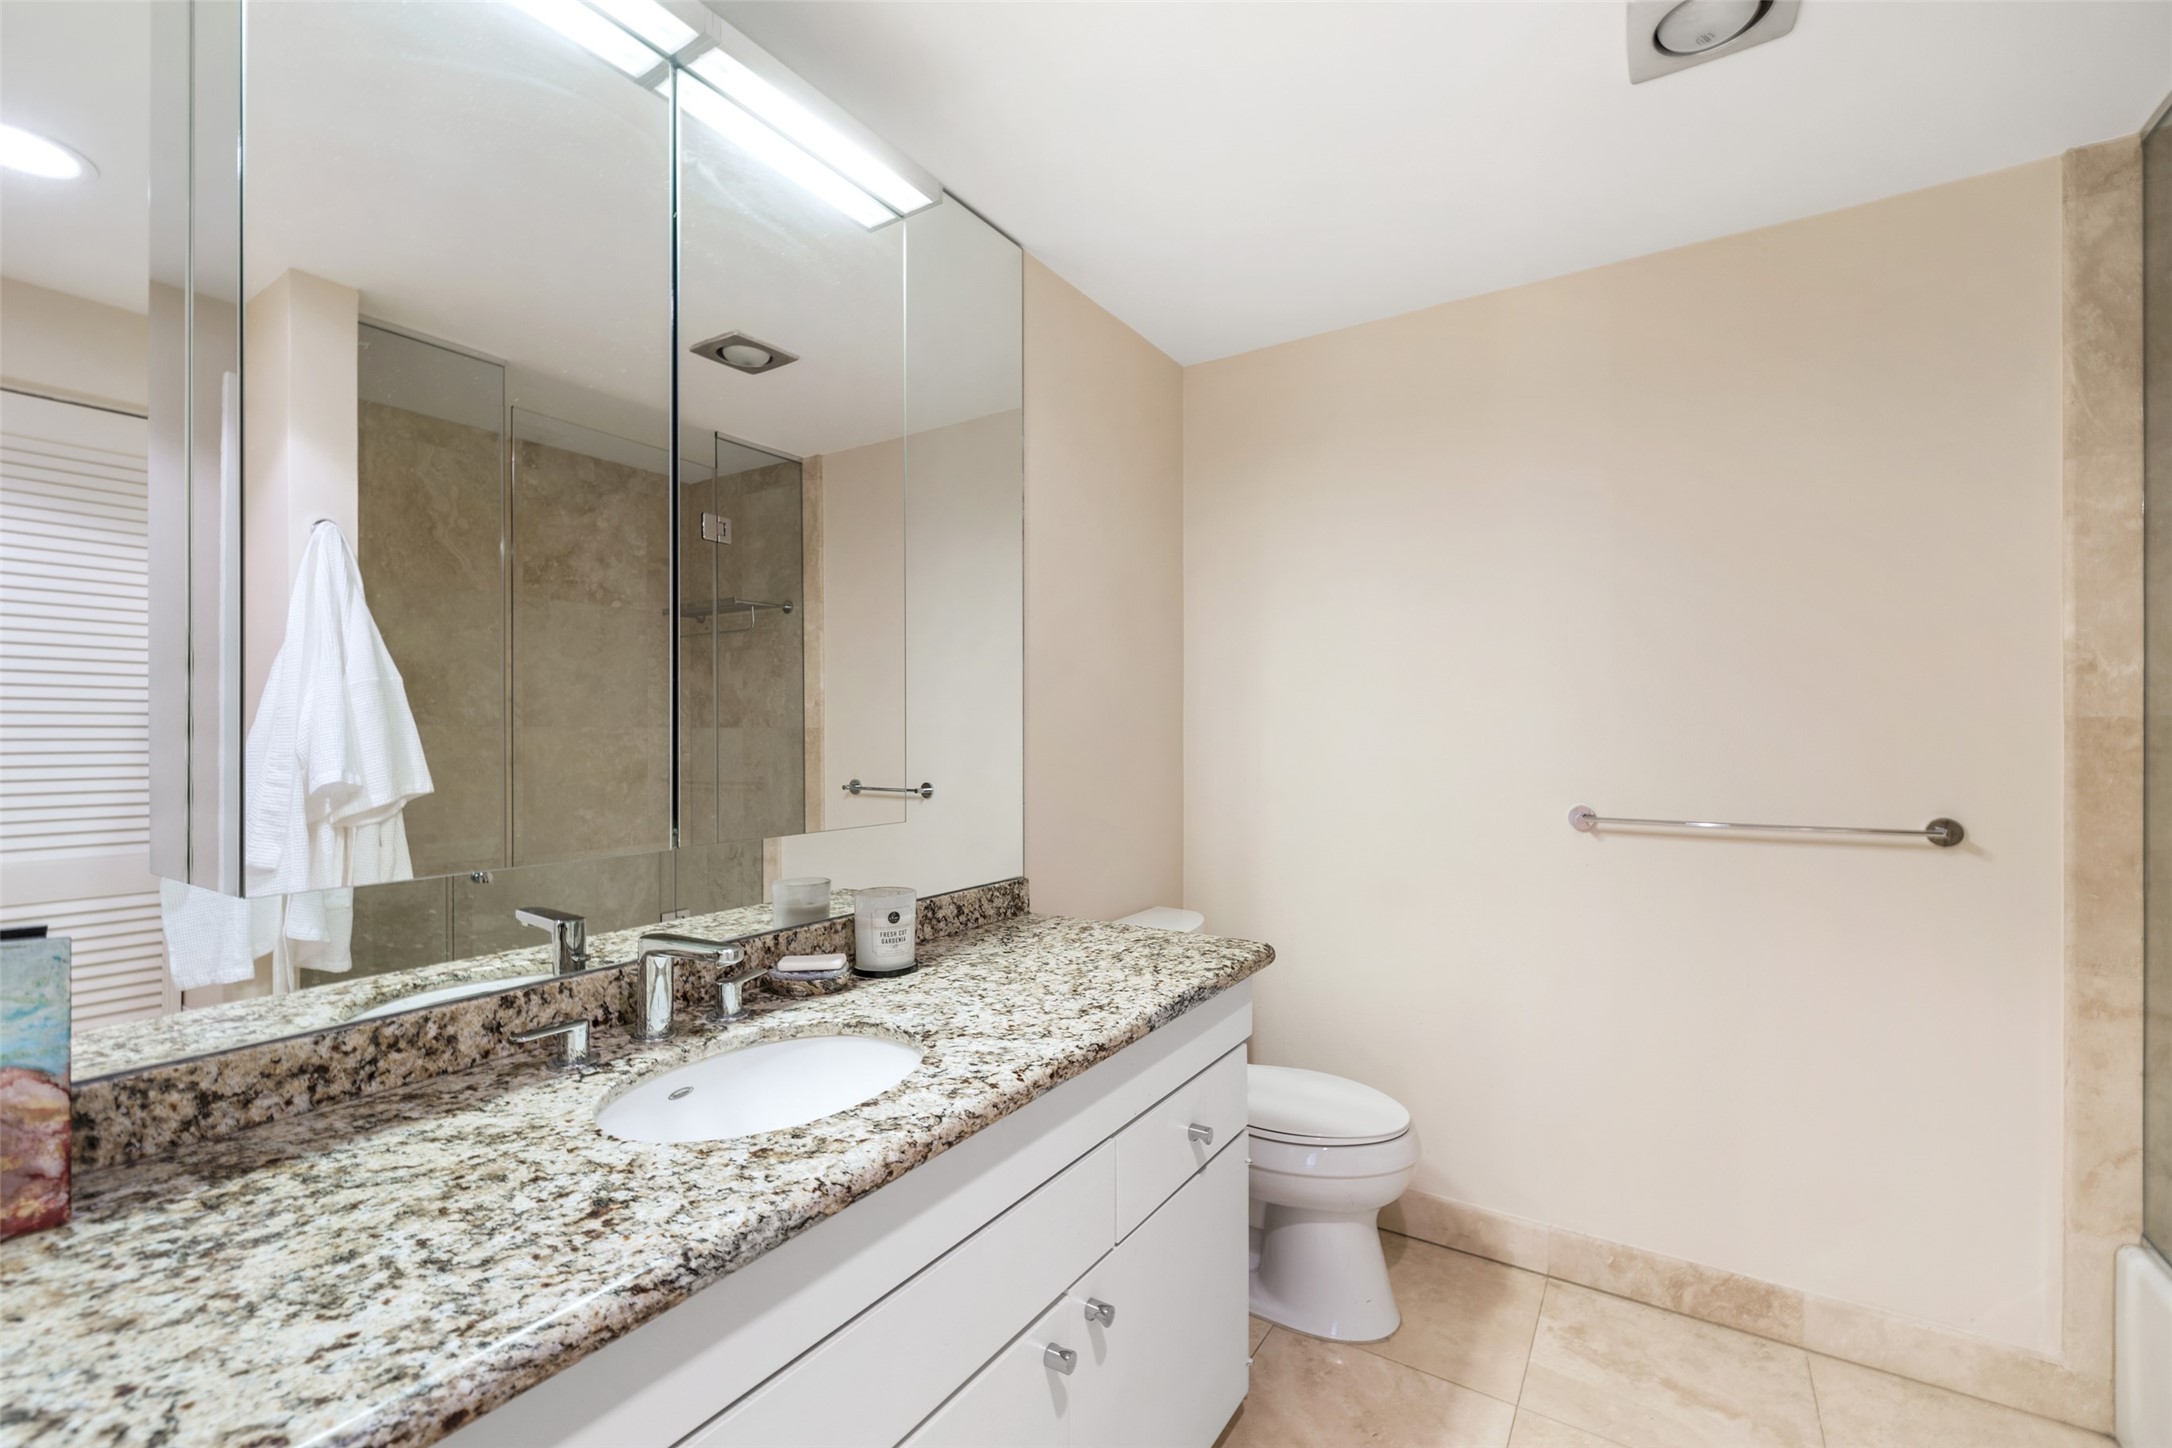 Secondary en-suite bathroom with granite countertops and wall mirrors.